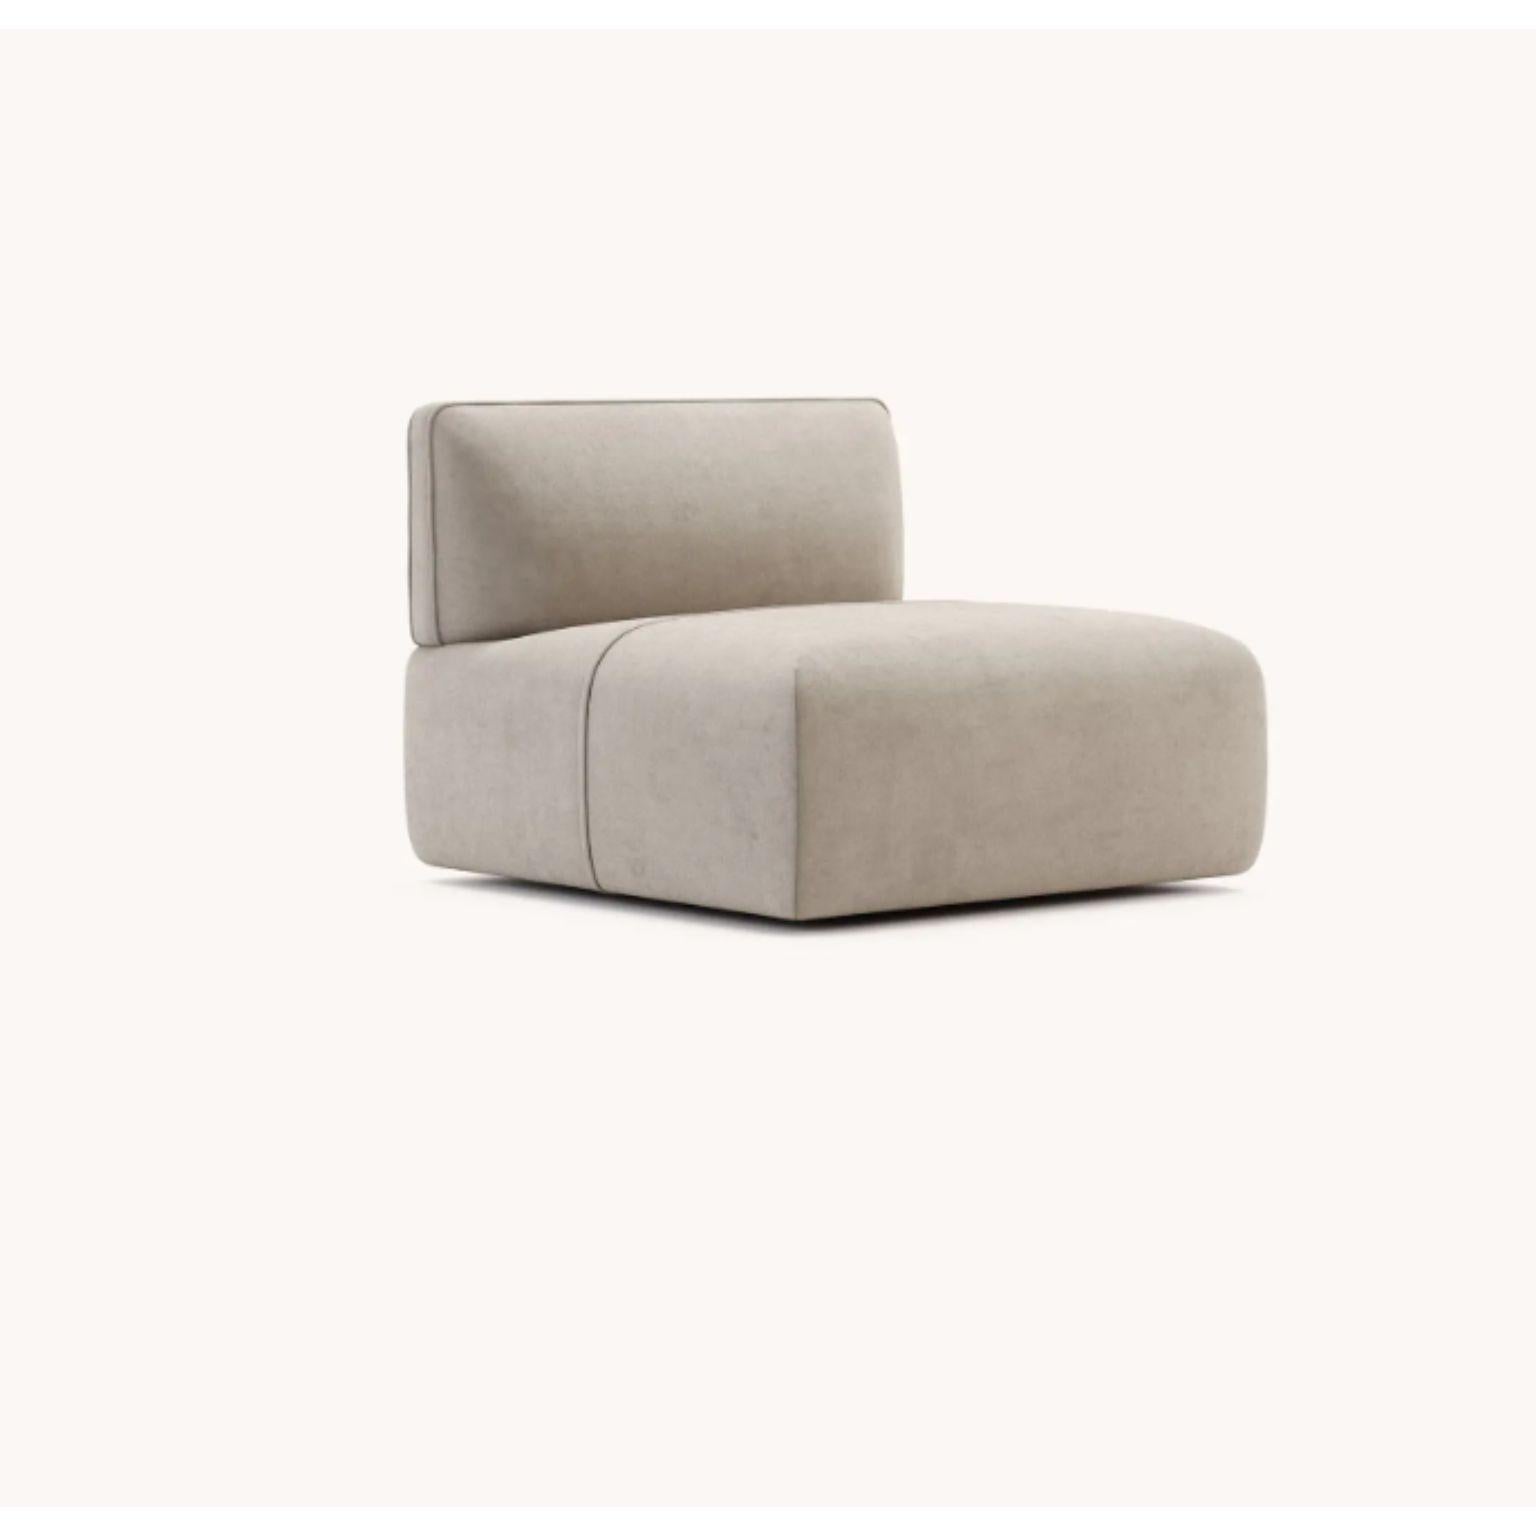 Disruption Module with Back by Domkapa
Materials: Velvet (Aldan 2928). 
Dimensions: W 100 x D 100 x H 80 cm.
Also available in different materials. Please contact us.

Disruption is a modular sofa, fully upholstered, with minimalistic design